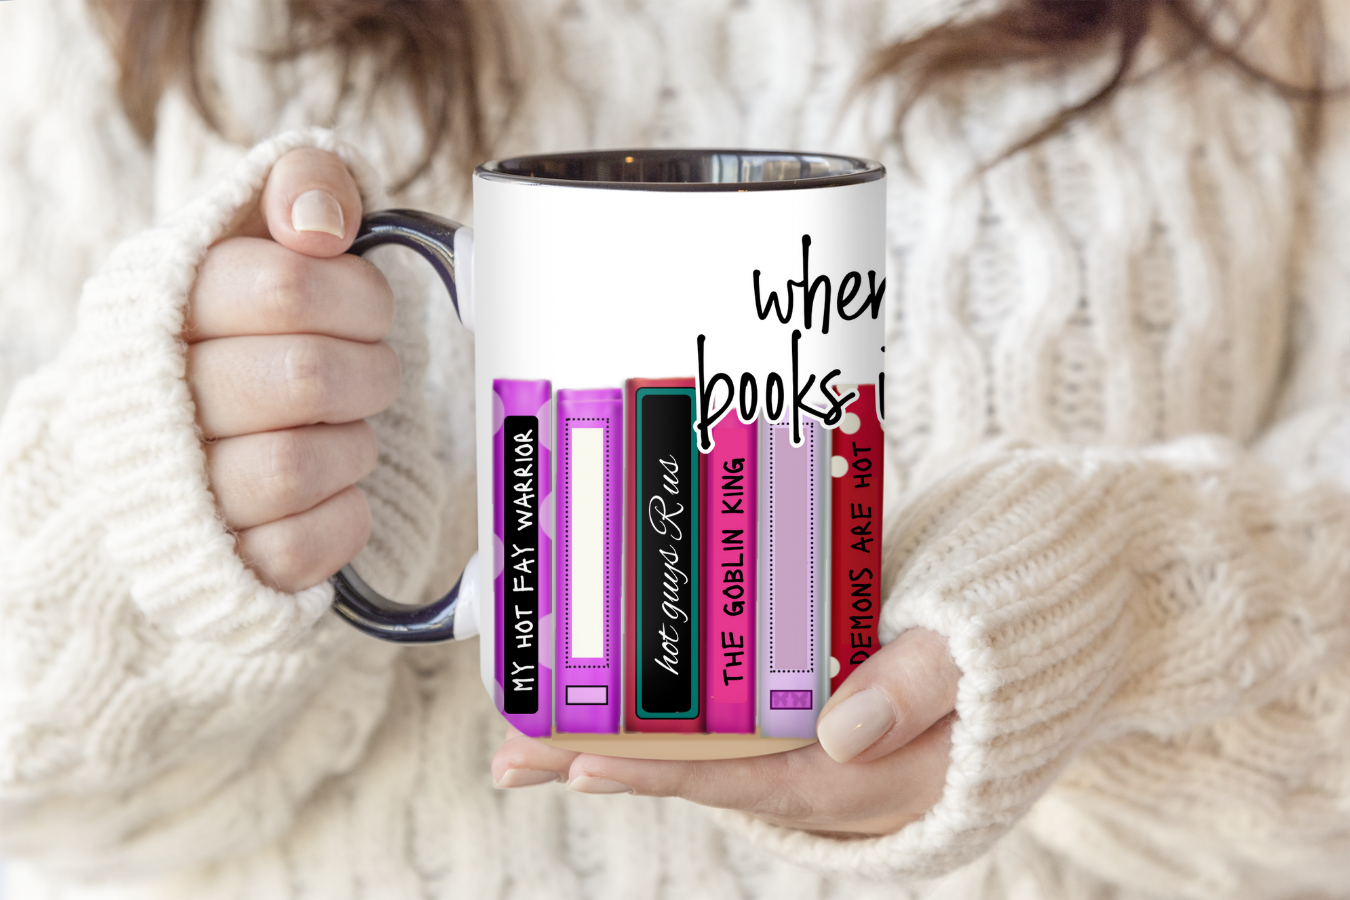 When I Think About Books | Mug - The Pretty Things.ca